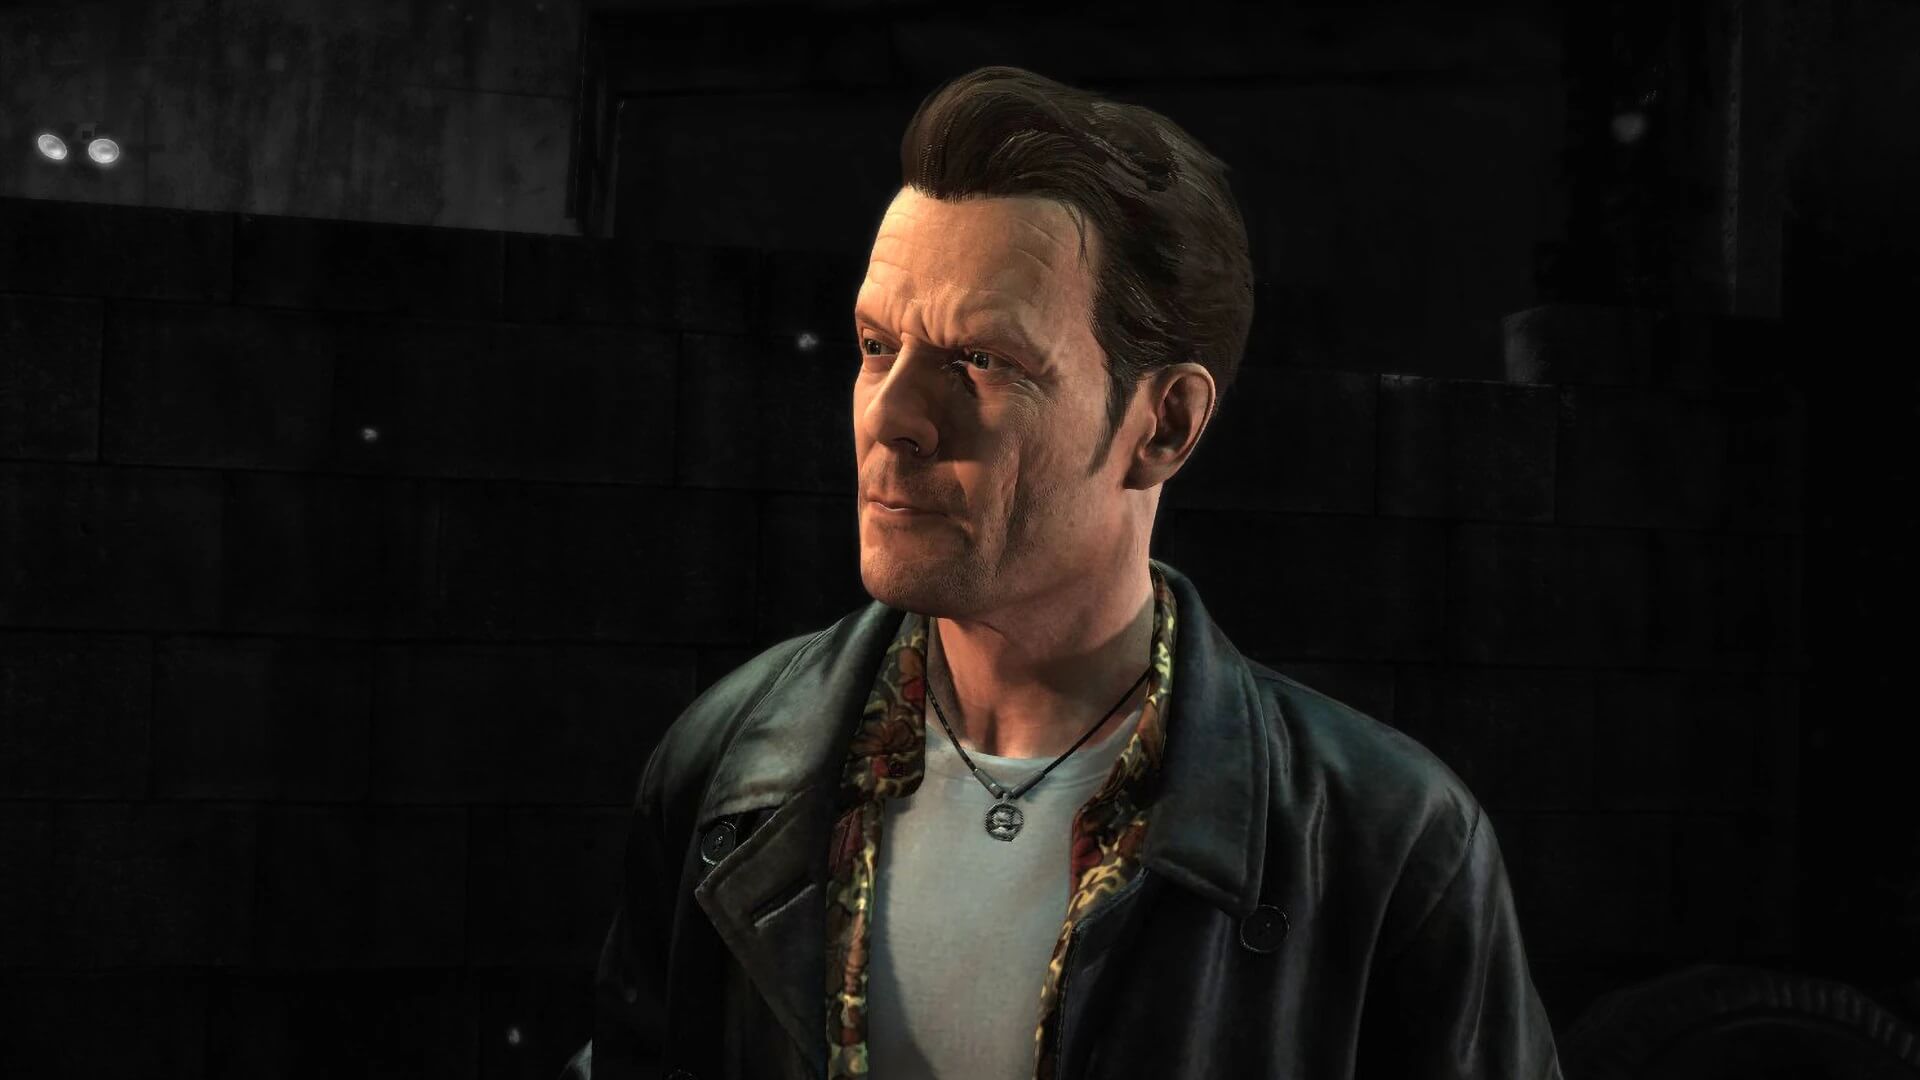 Max Payne 3 Gets A New Confirmed Release Date